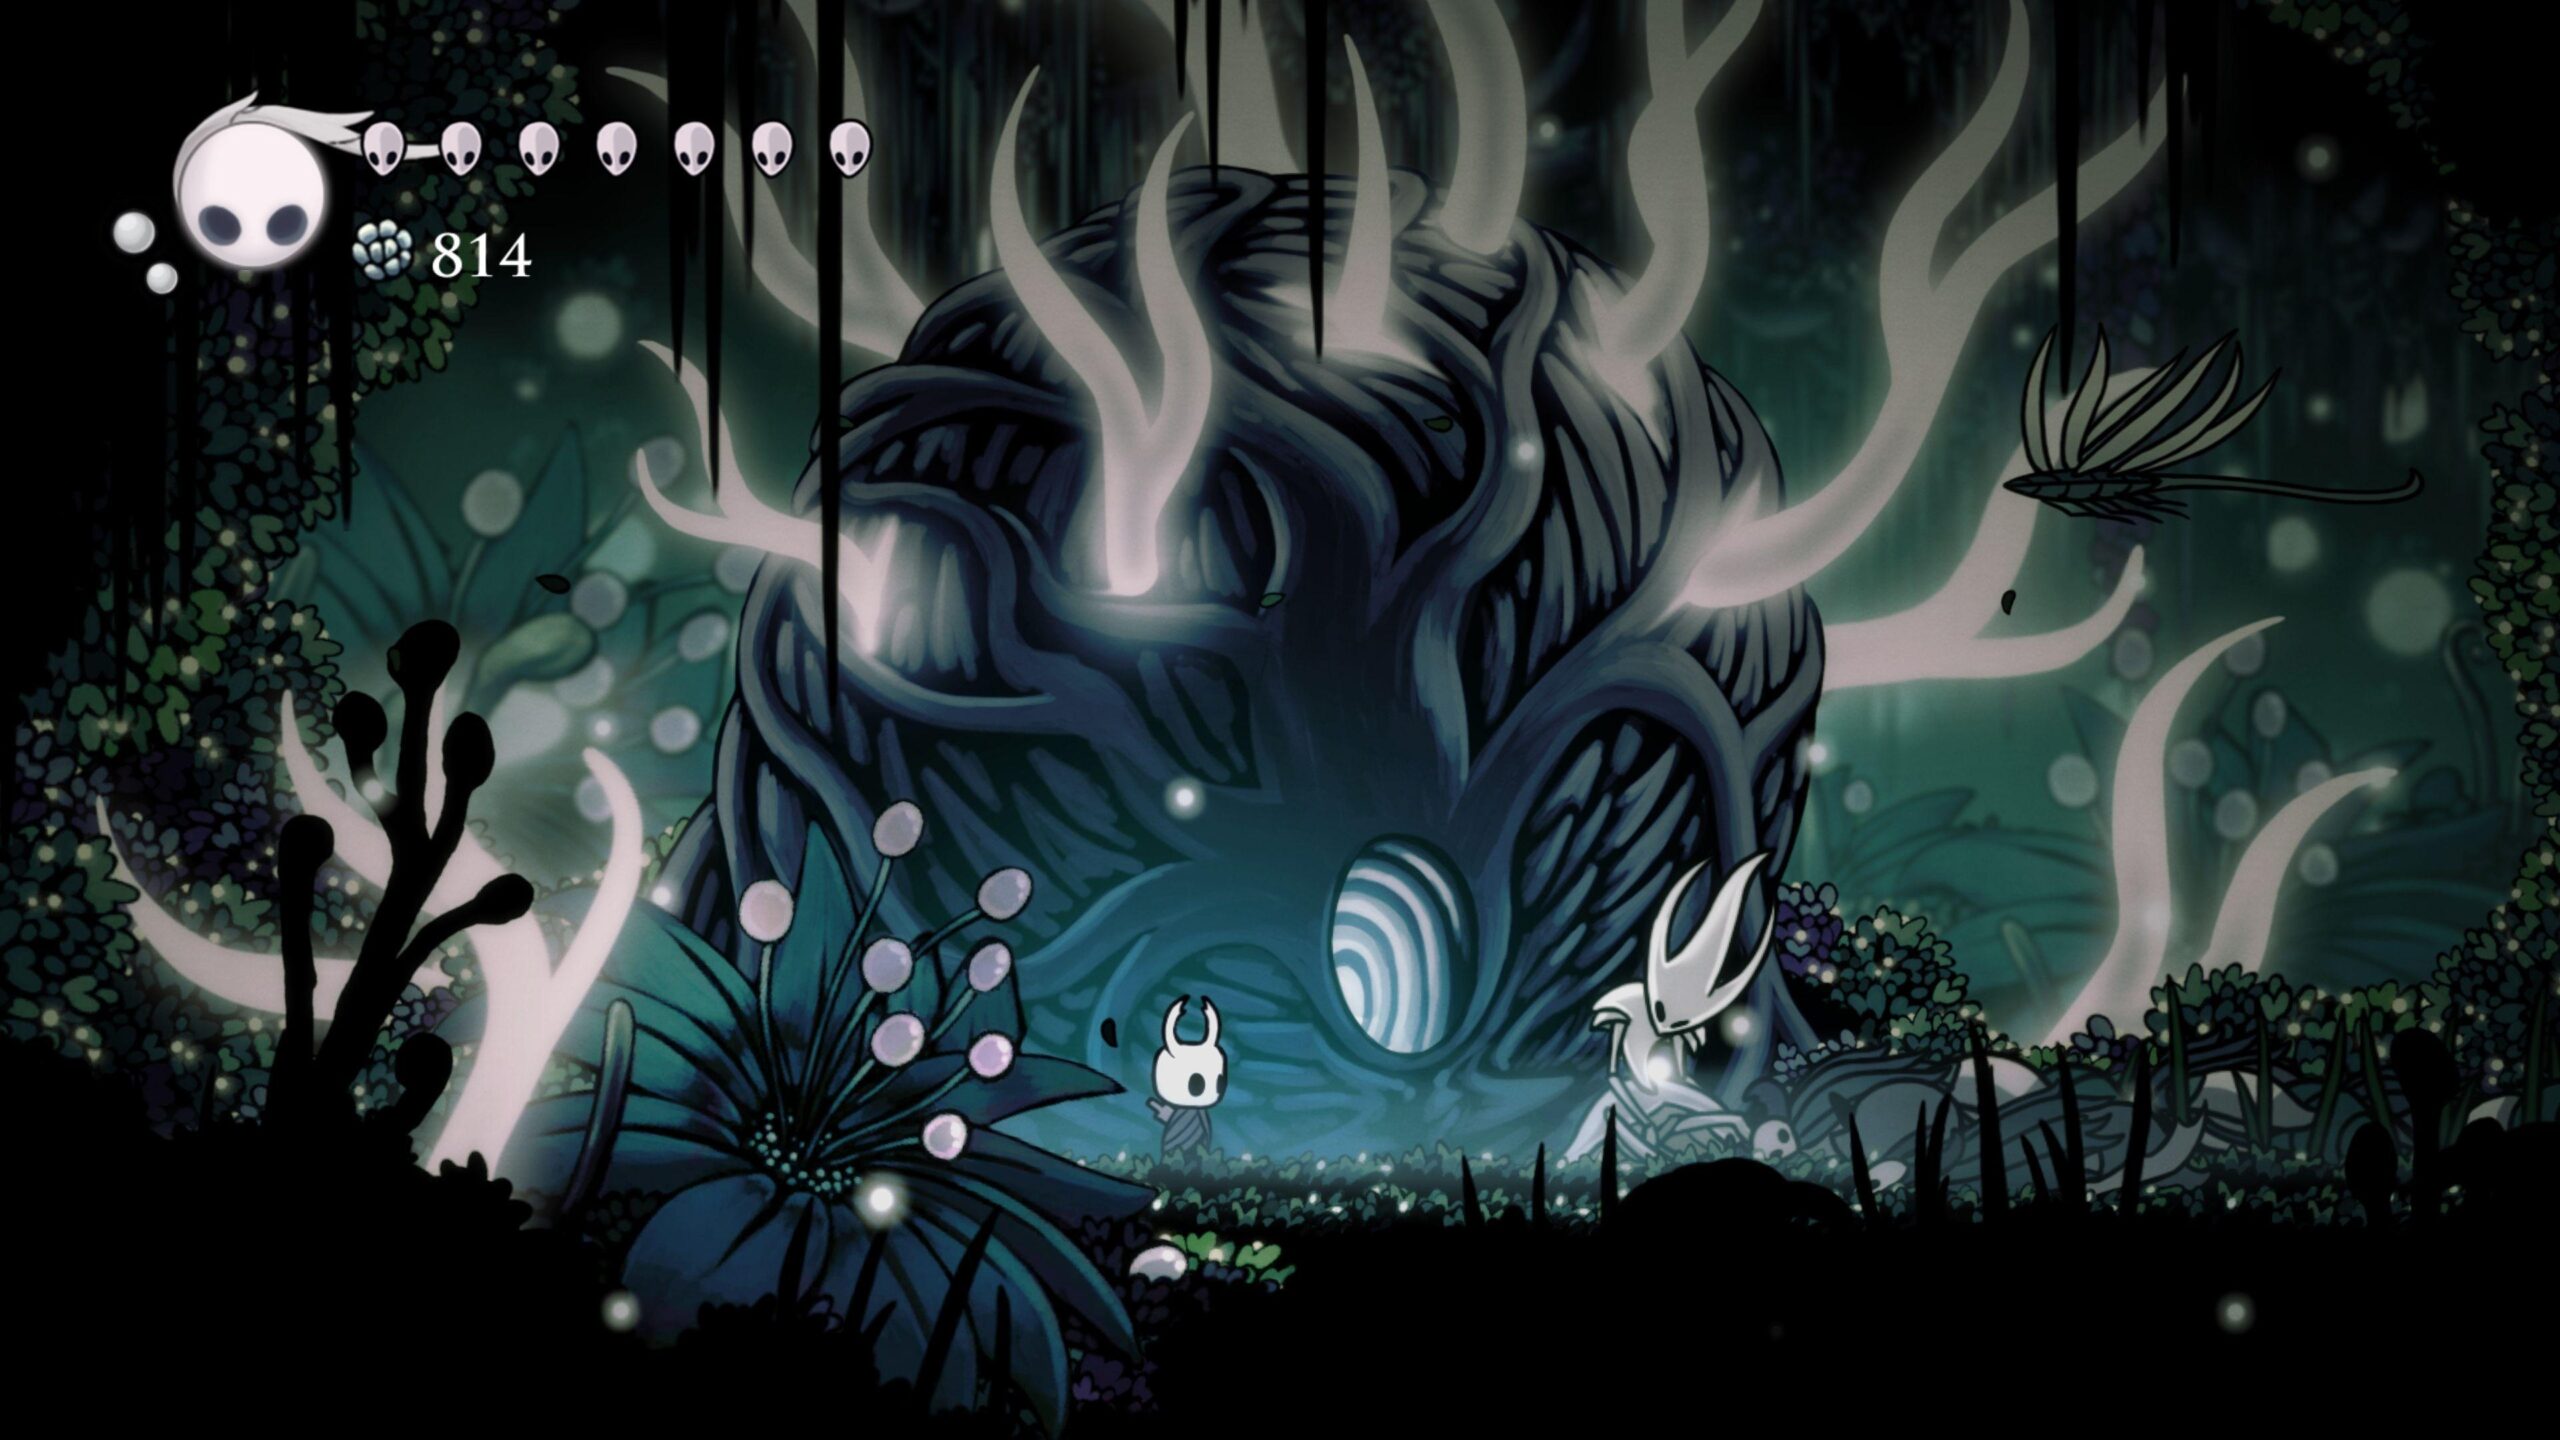 Hollow Knight Wallpaper Download, Hollow Knight, Game